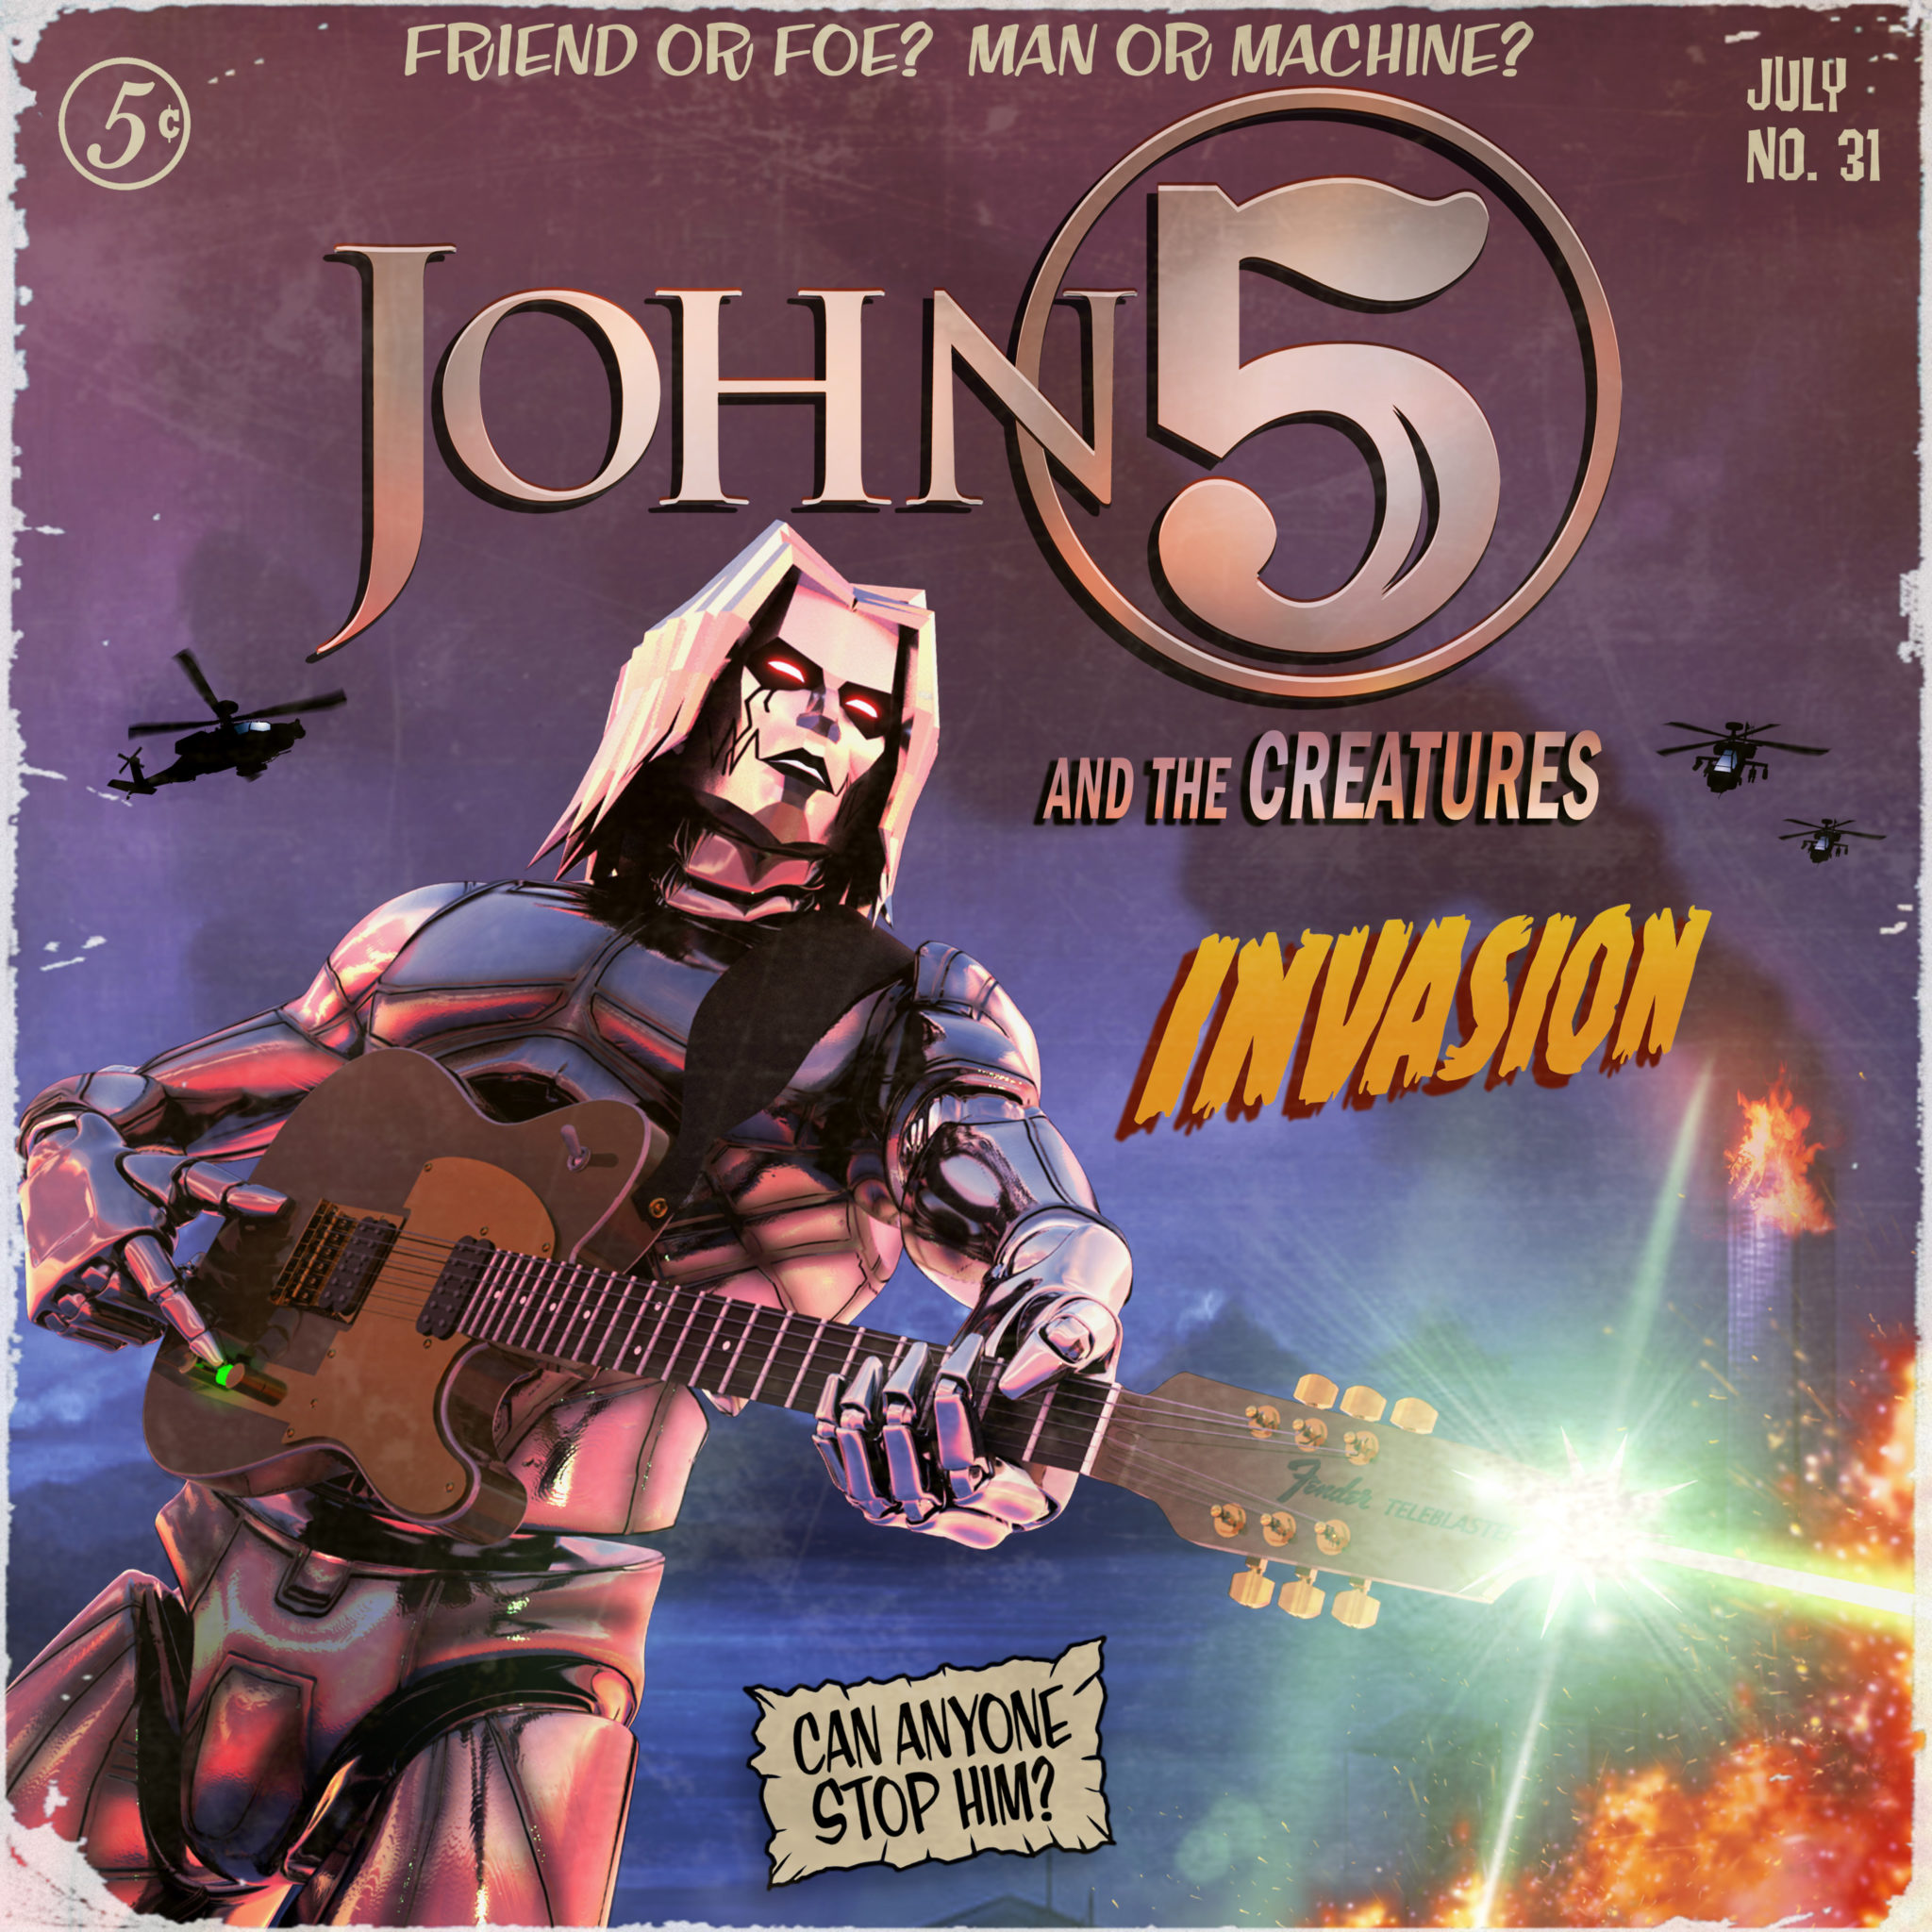 Album Review: JOHN 5 AND THE CREATURES – Invasion – Metal Nation